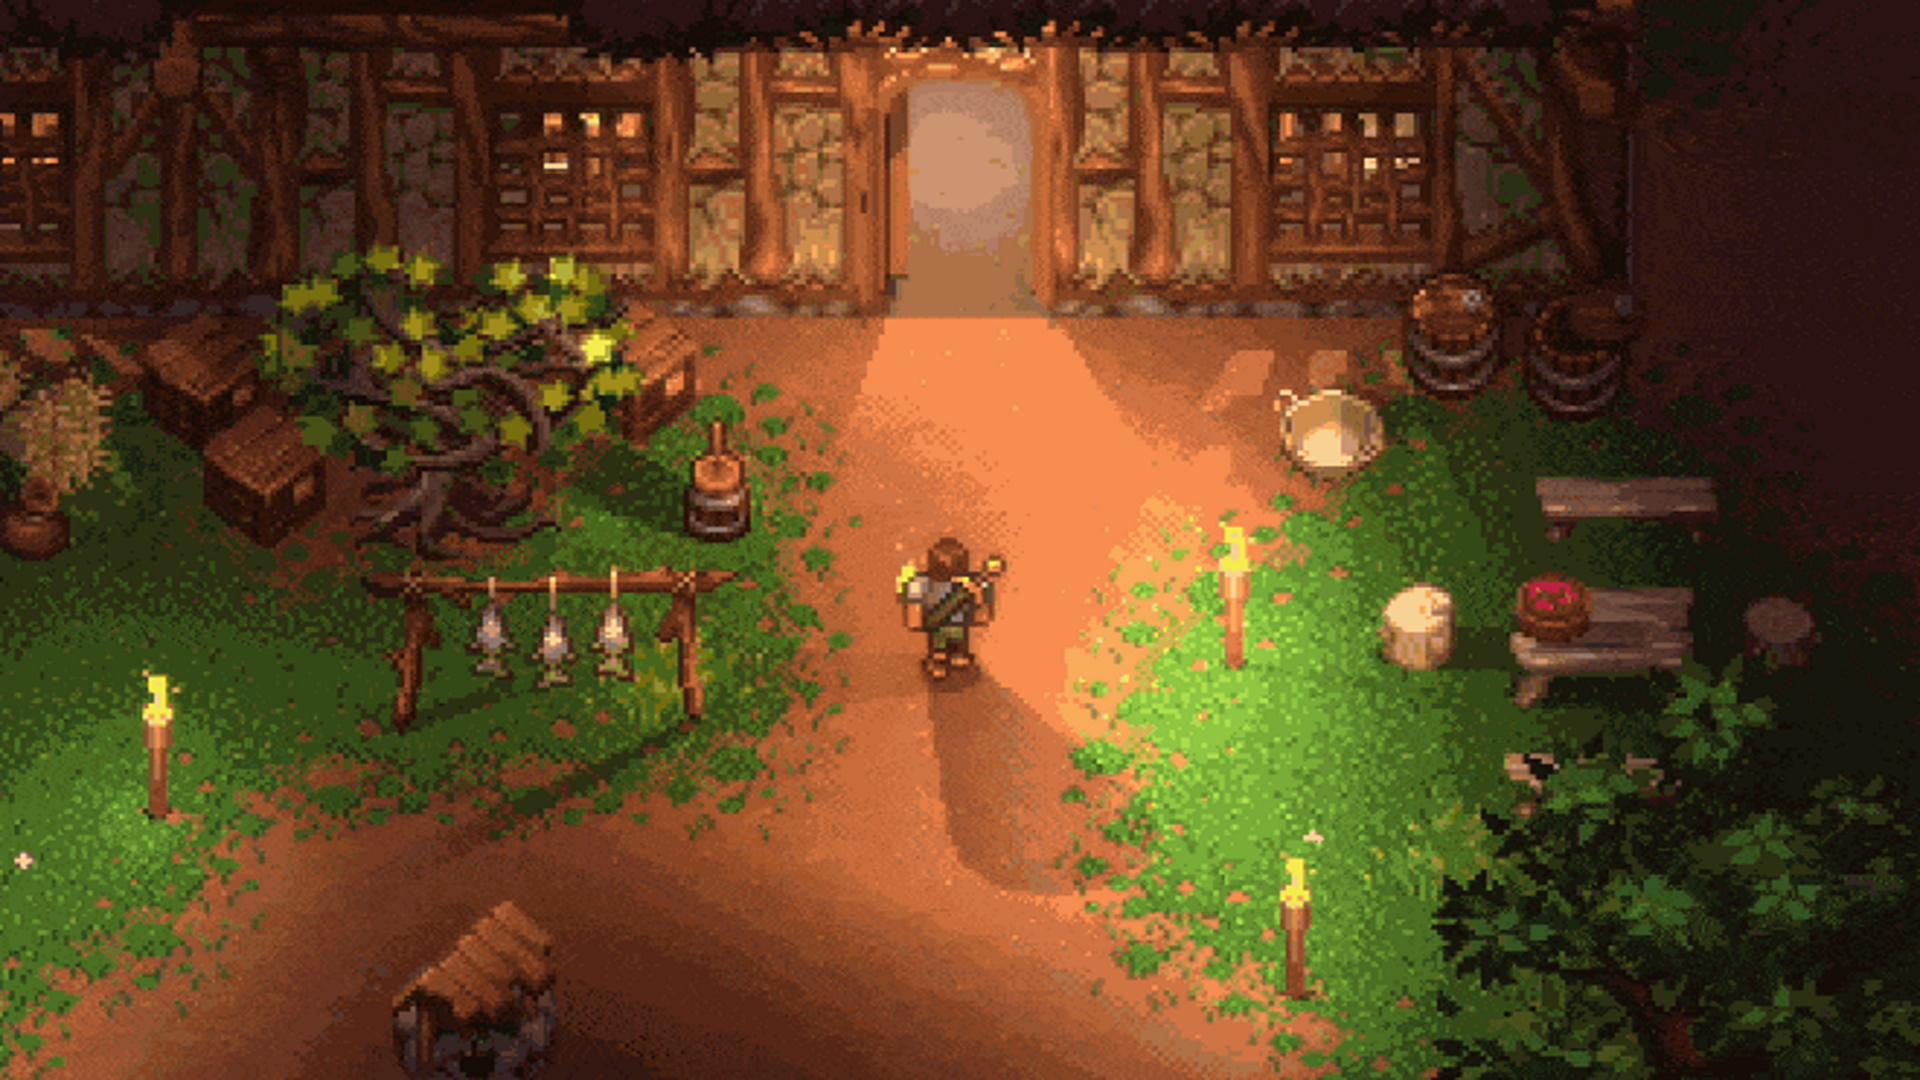 World of Anterra is indie Skyrim with pixel art and it looks amazing